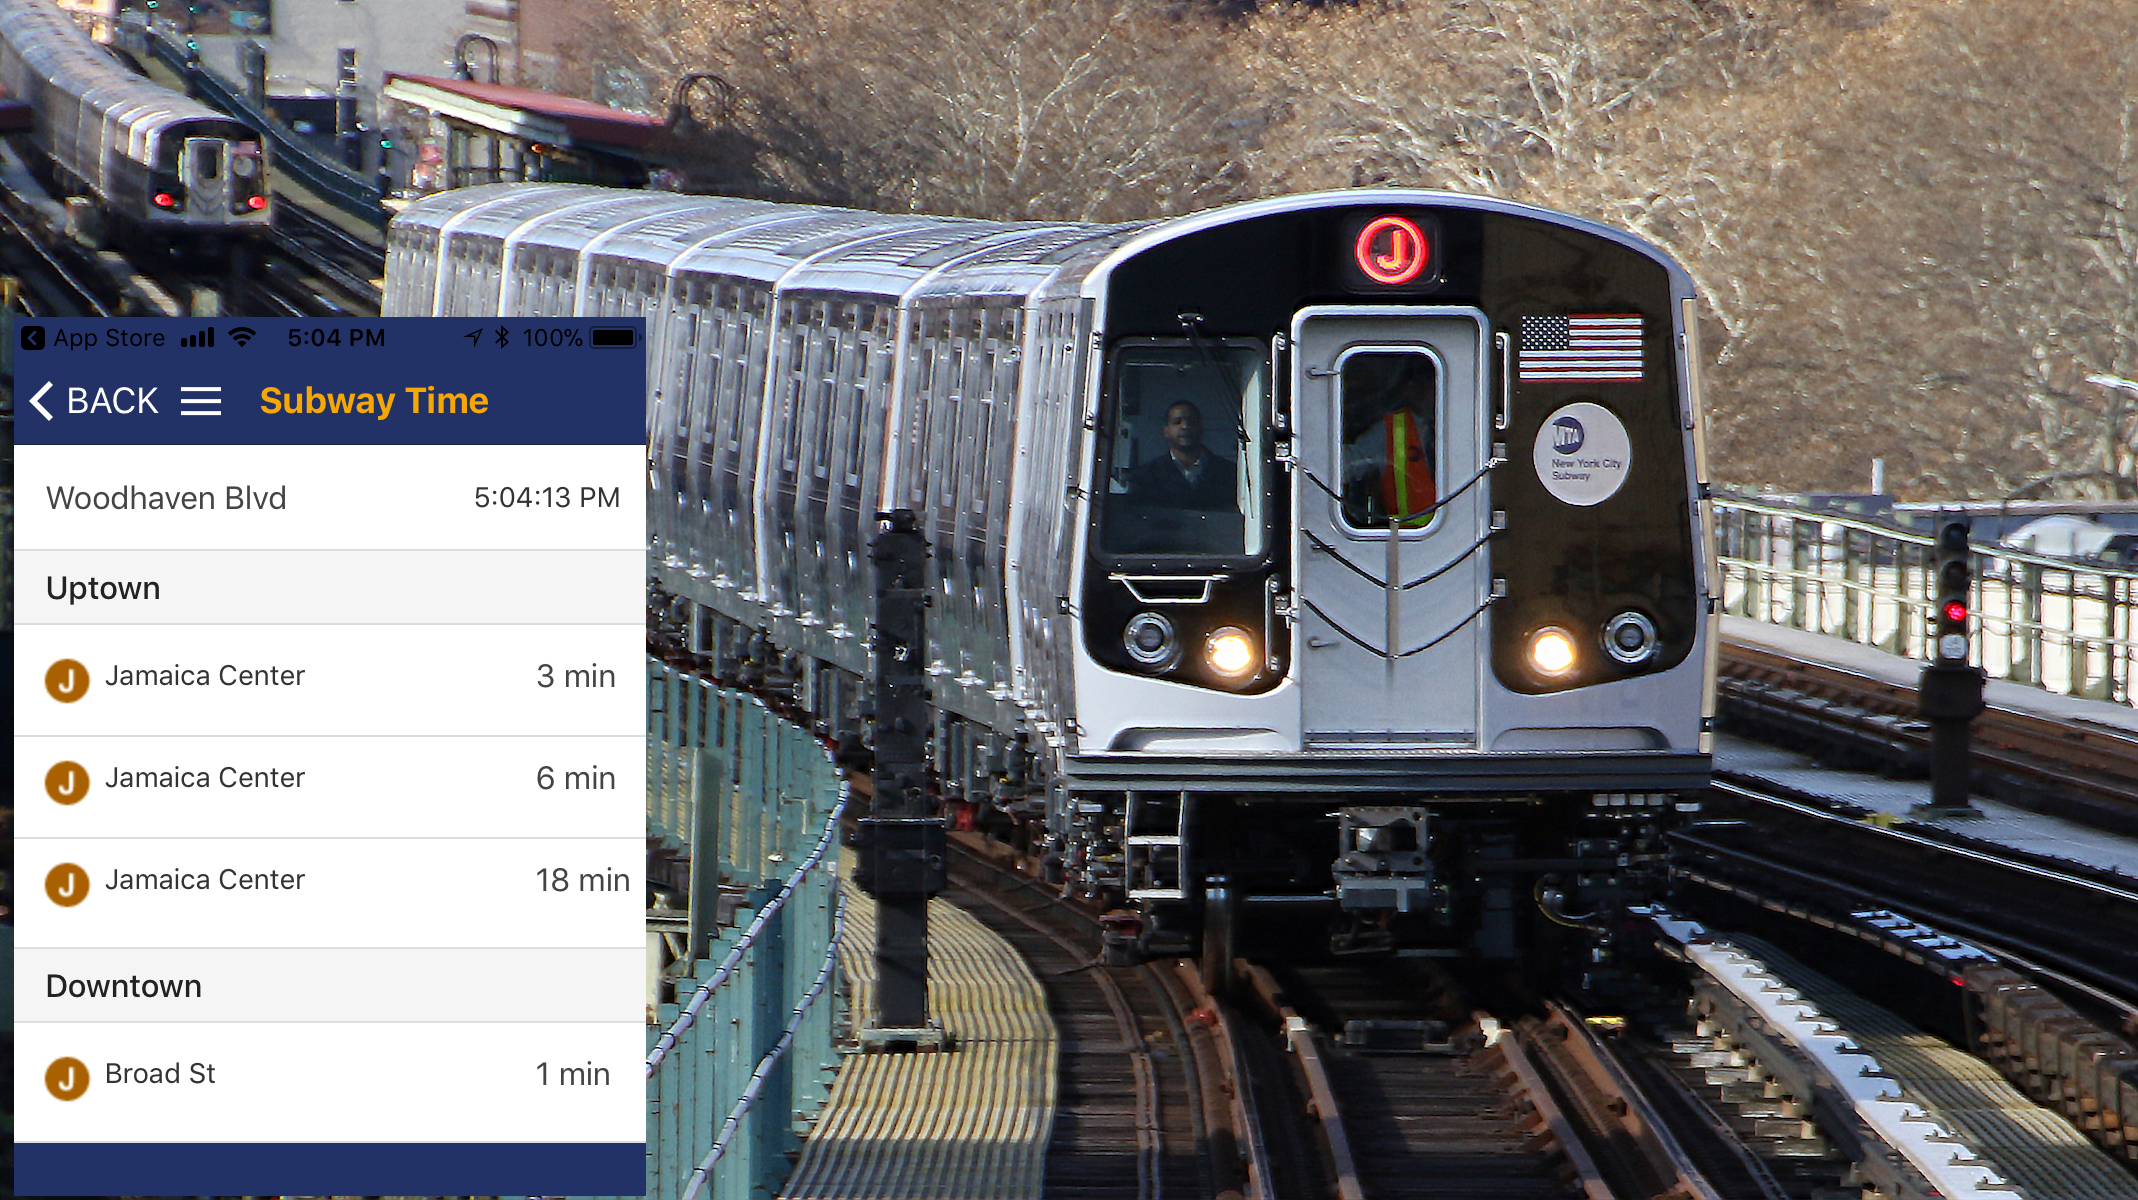 You can now get real-time information on when the J/Z train will